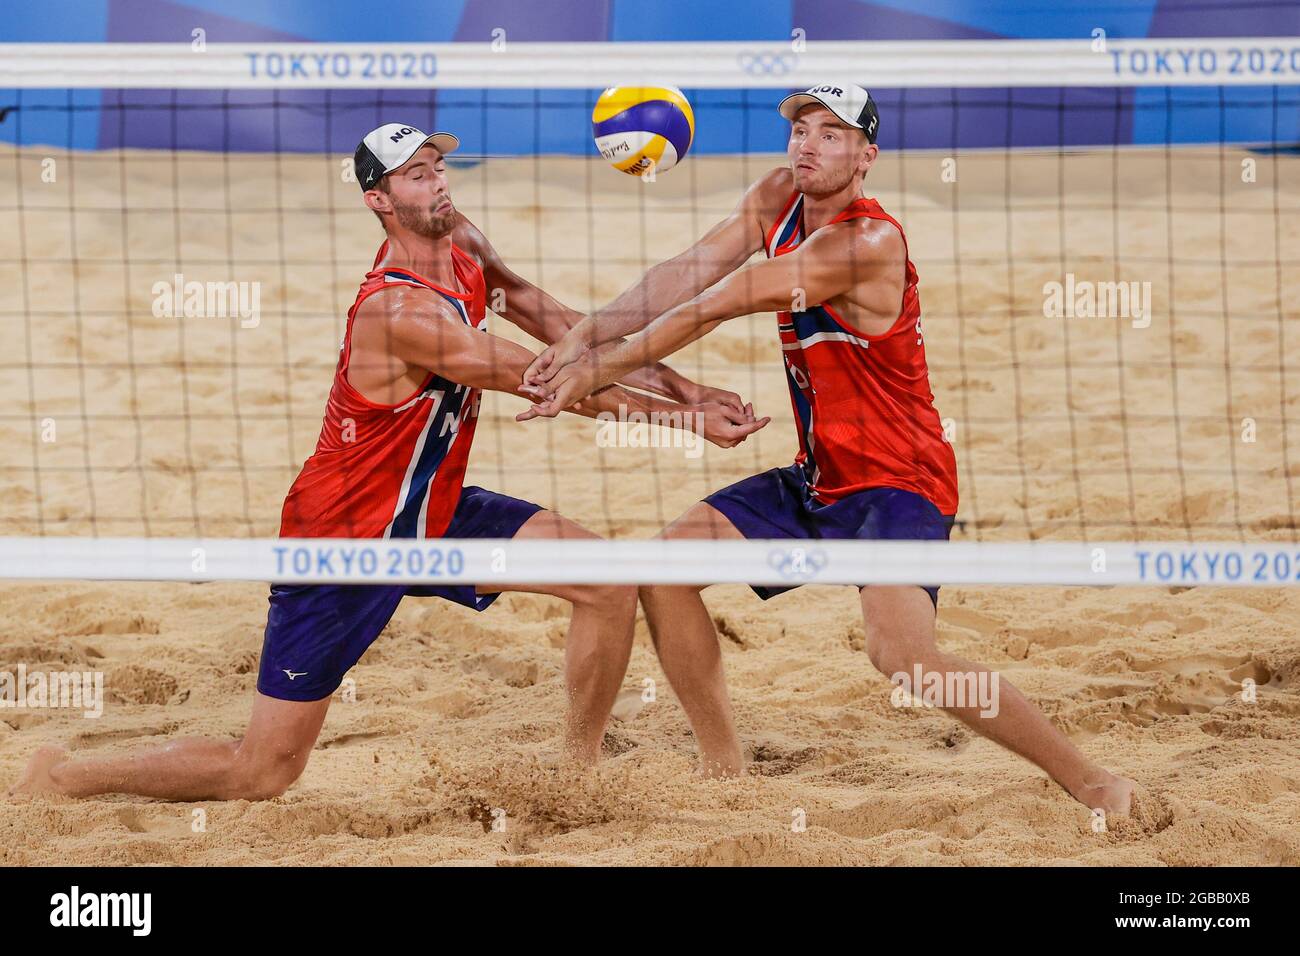 TOKYO, JAPAN - AUGUST 1: Anders Bermtsen Mol of Norway and Christian Sandlie Sorum of Norway competing on Men's Round 16 during the Tokyo 2020 Olympic Games at the Shiokaze Park on August 1, 2021 in Tokyo, Japan (Photo by Pim Waslander/Orange Pictures) NOCNSF Stock Photo